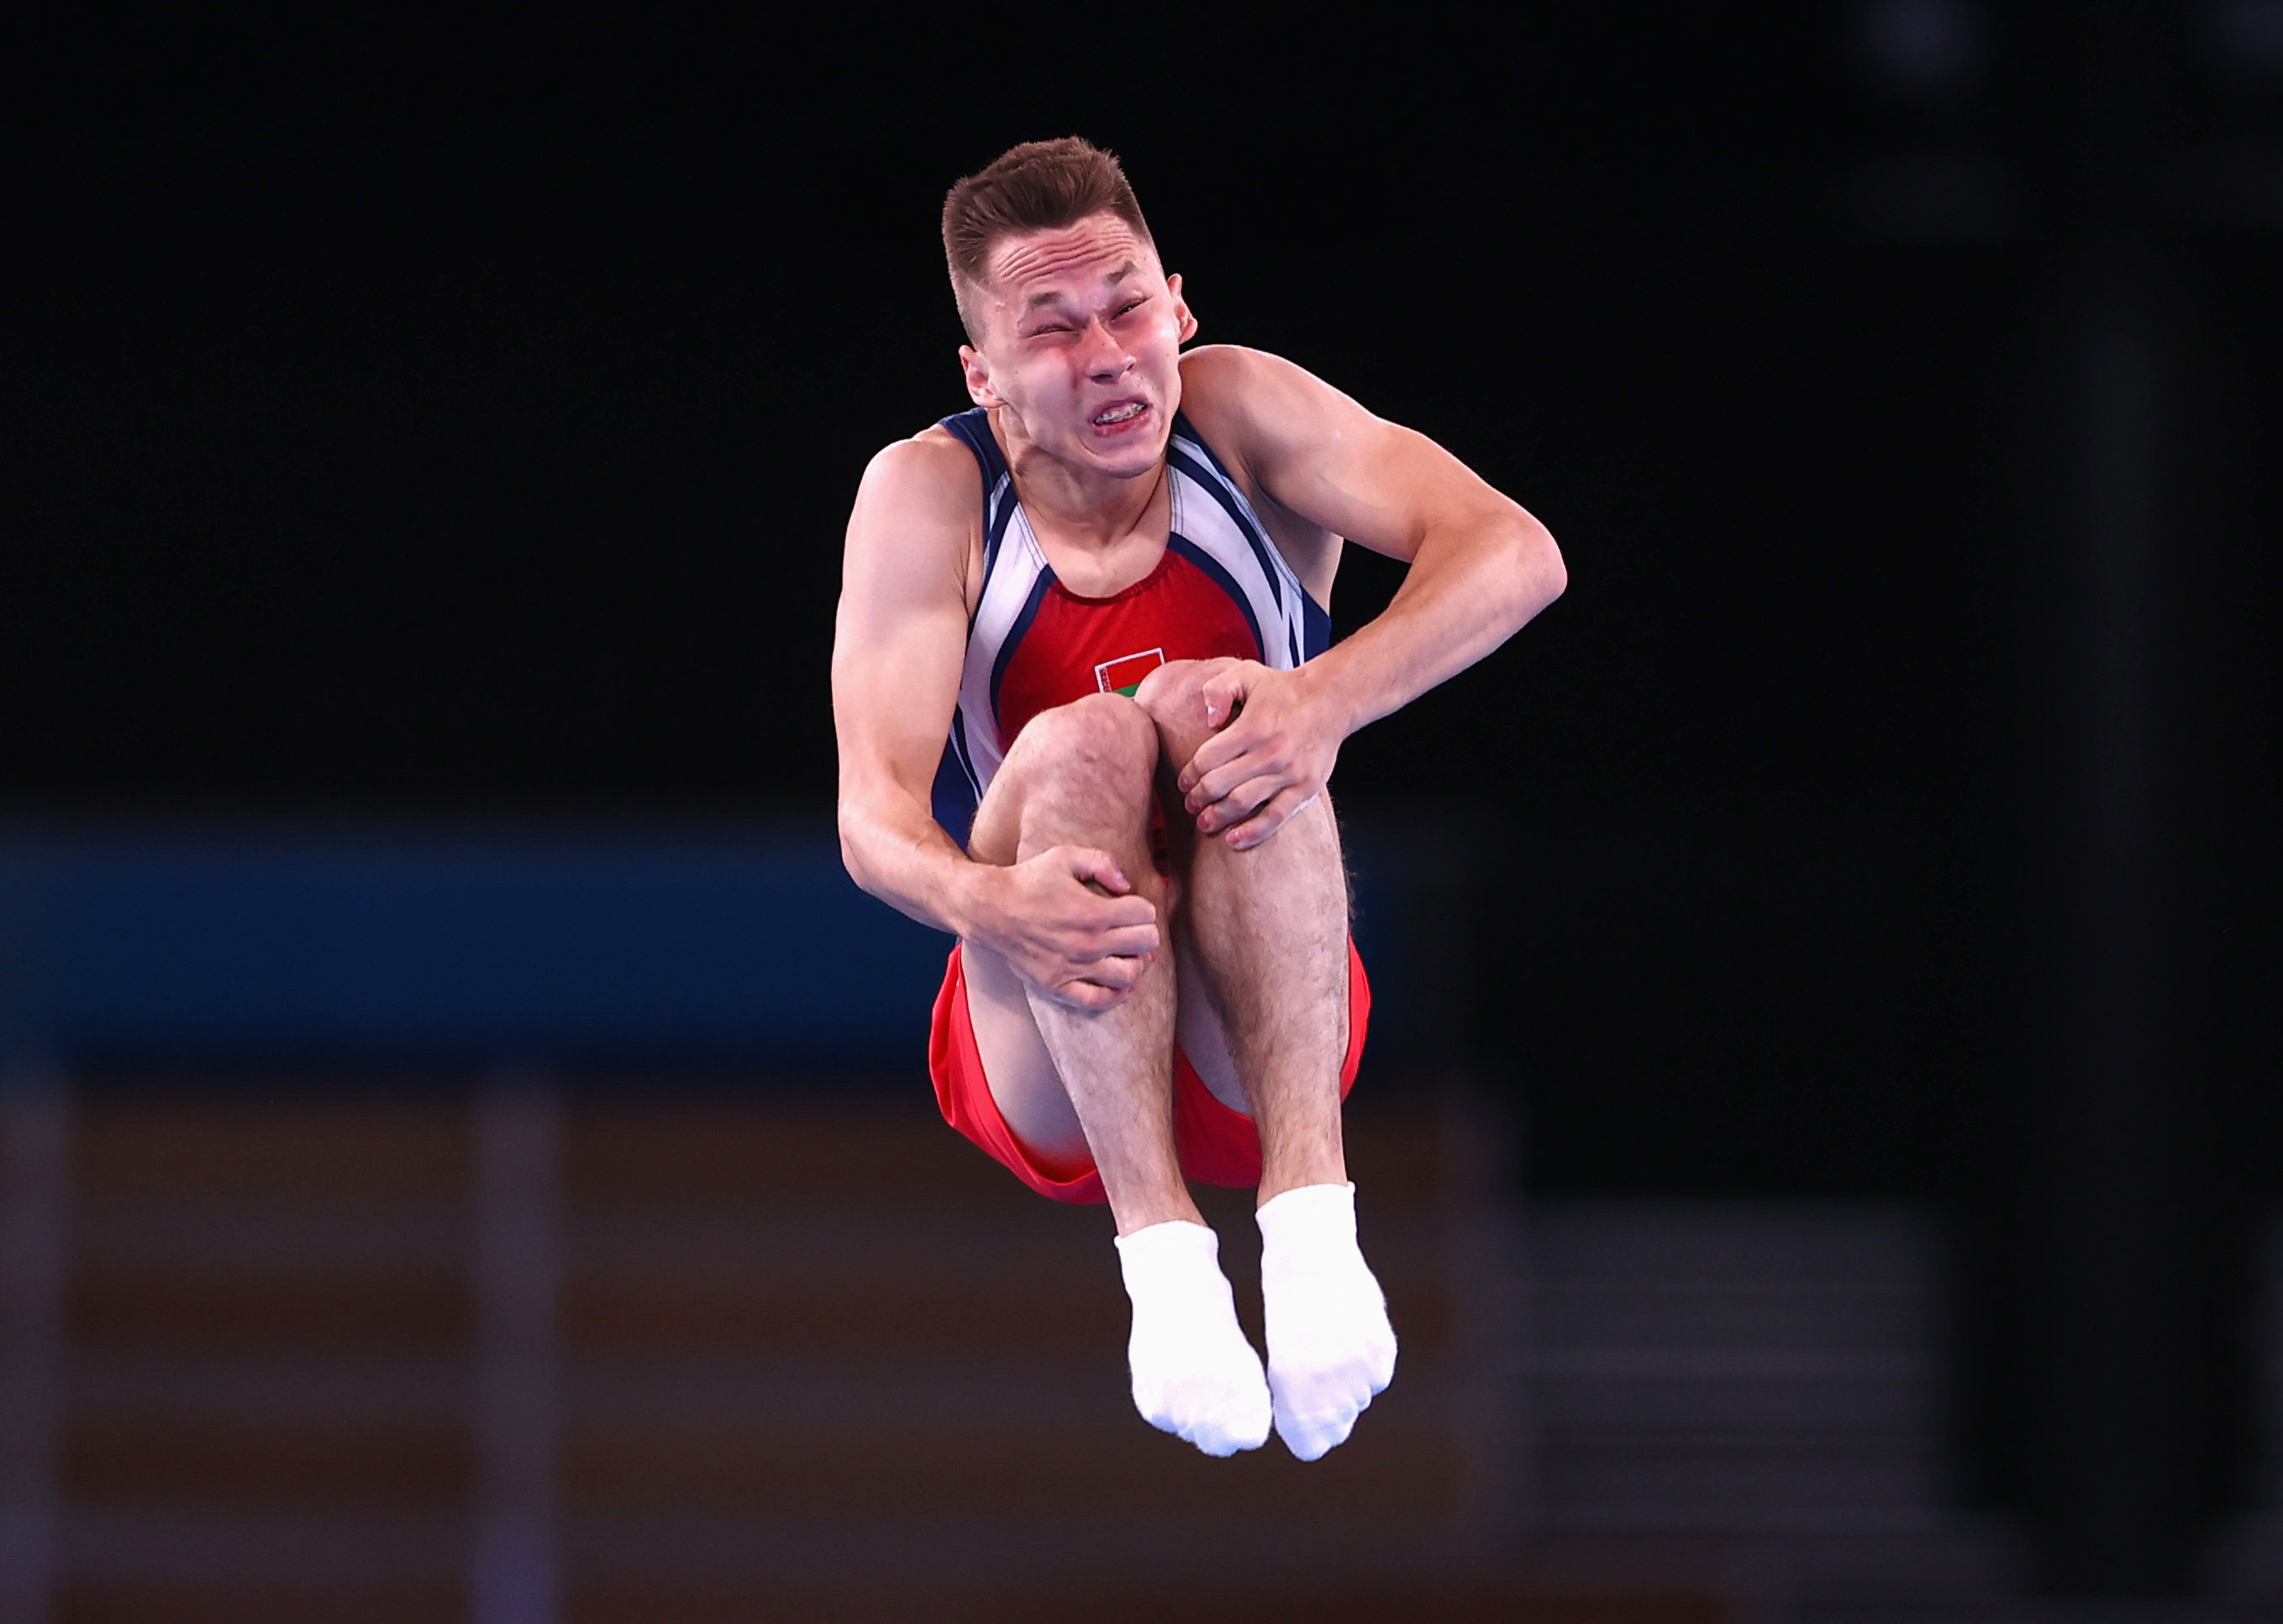 Gymnastics-Litvinovich claims trampoline for Belarus, China takes silver | Reuters